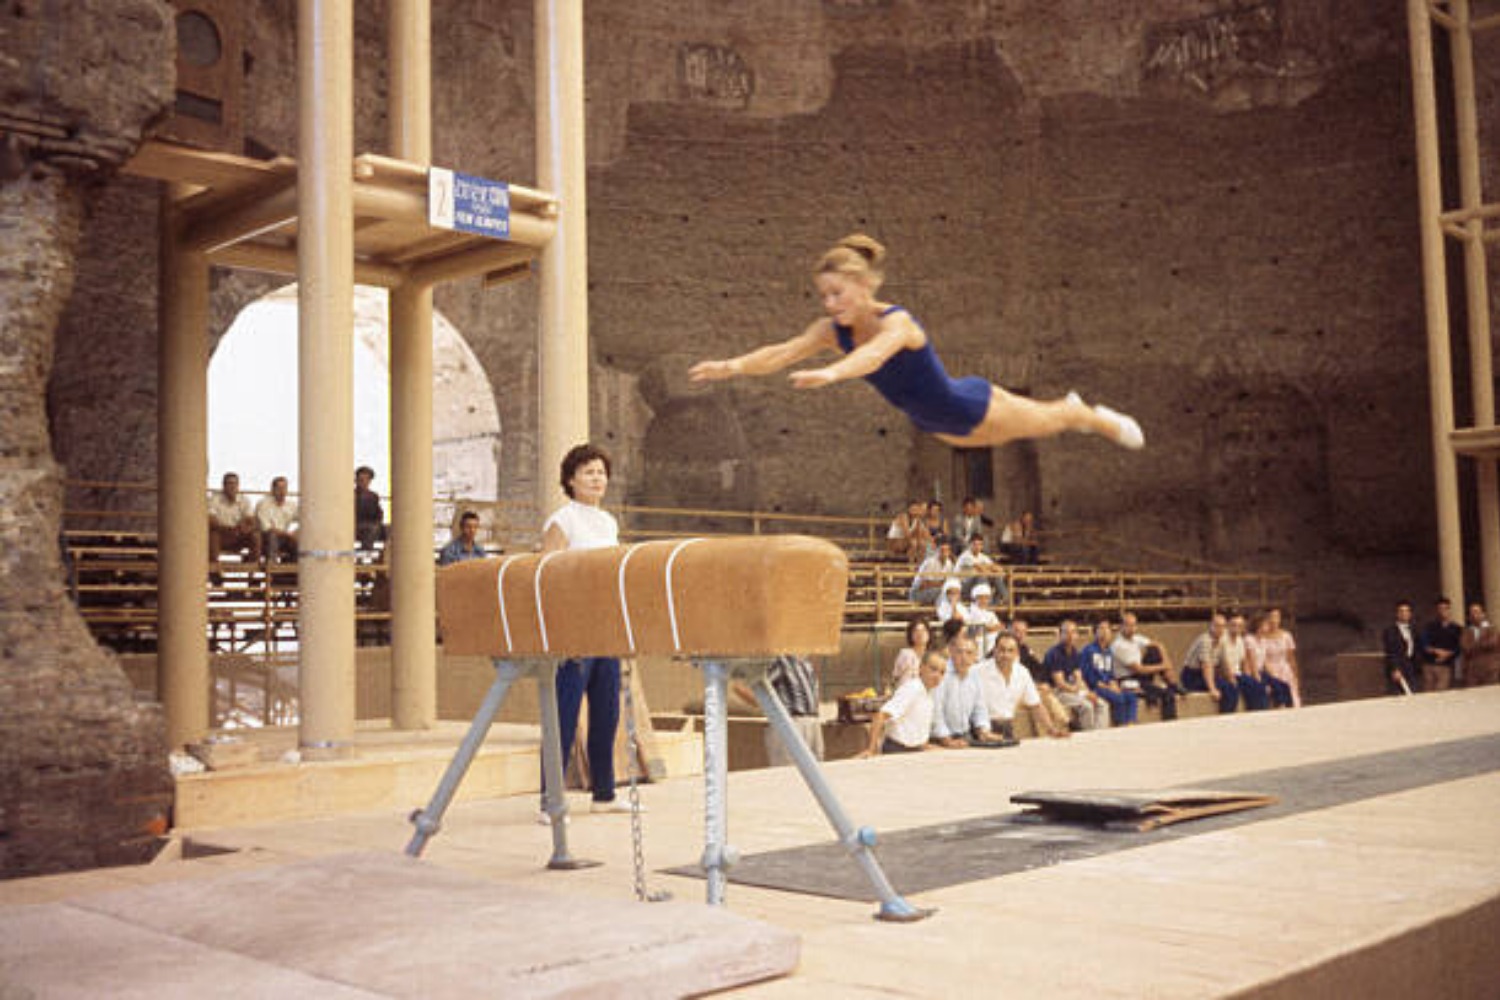 Olympic gymnastics: 3 Must-see venues from past games